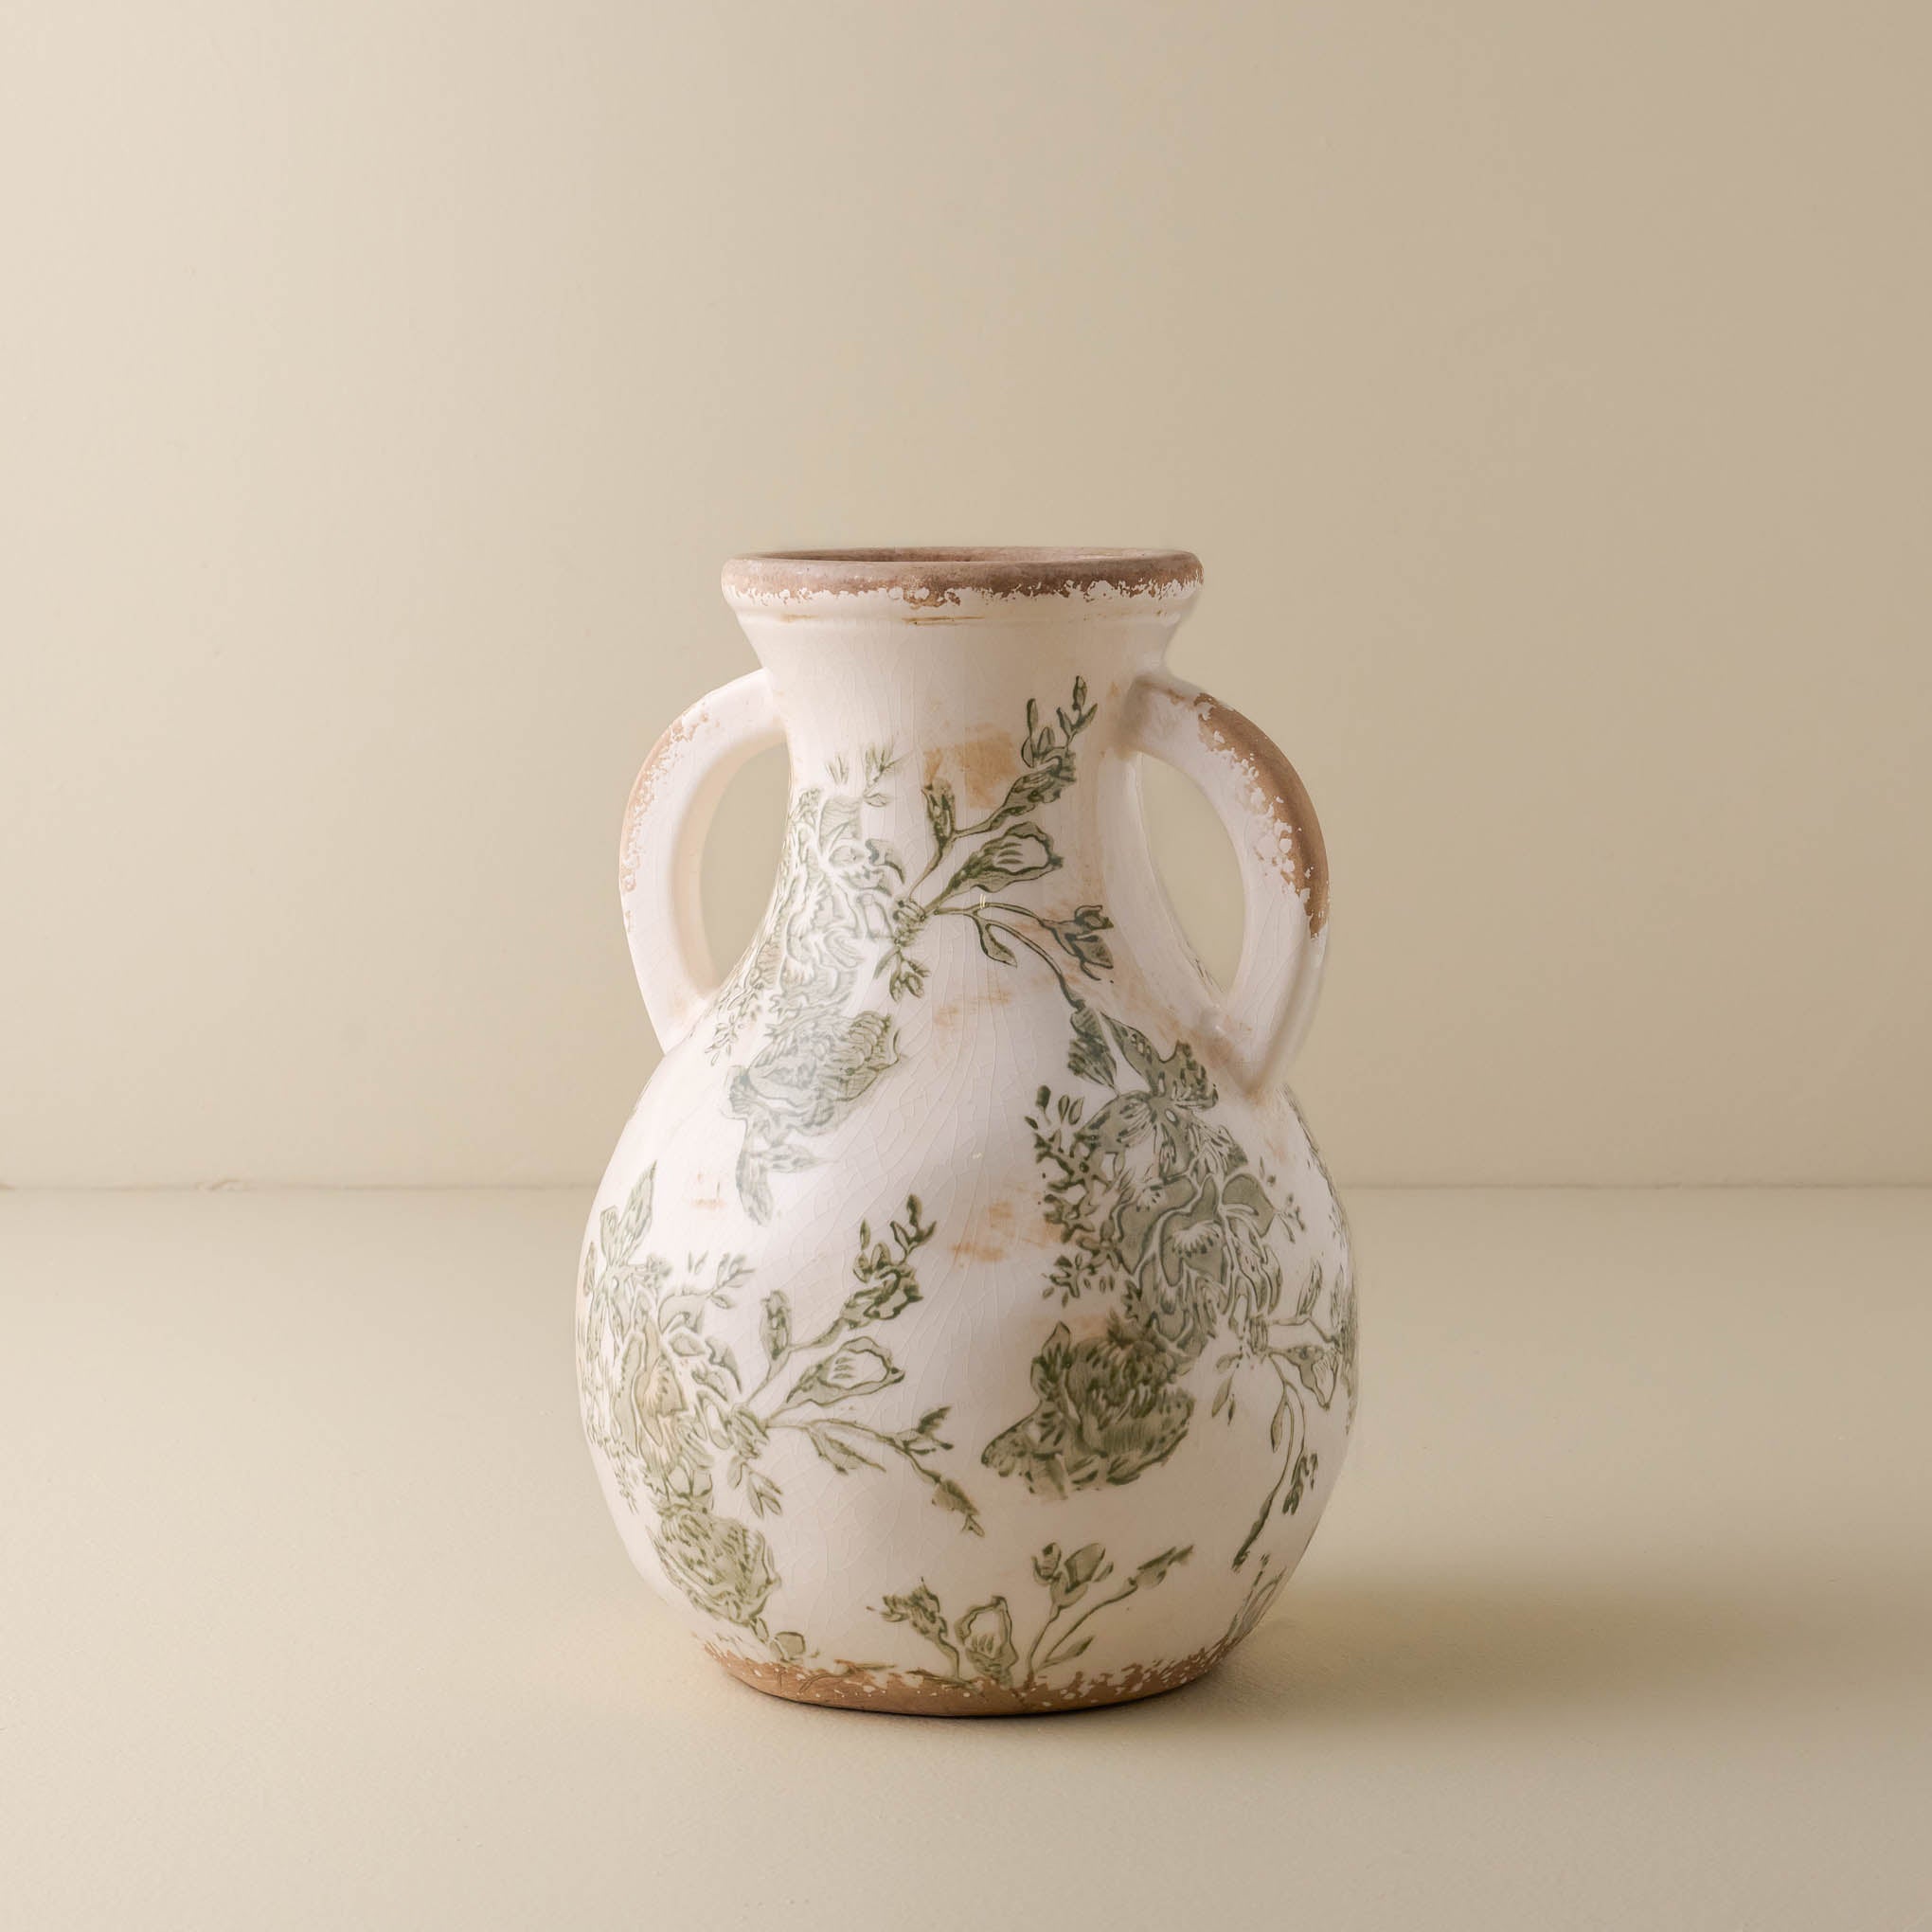 small sized Green and White floral Distressed Vase with two handles Items range from $48.00 to $80.00